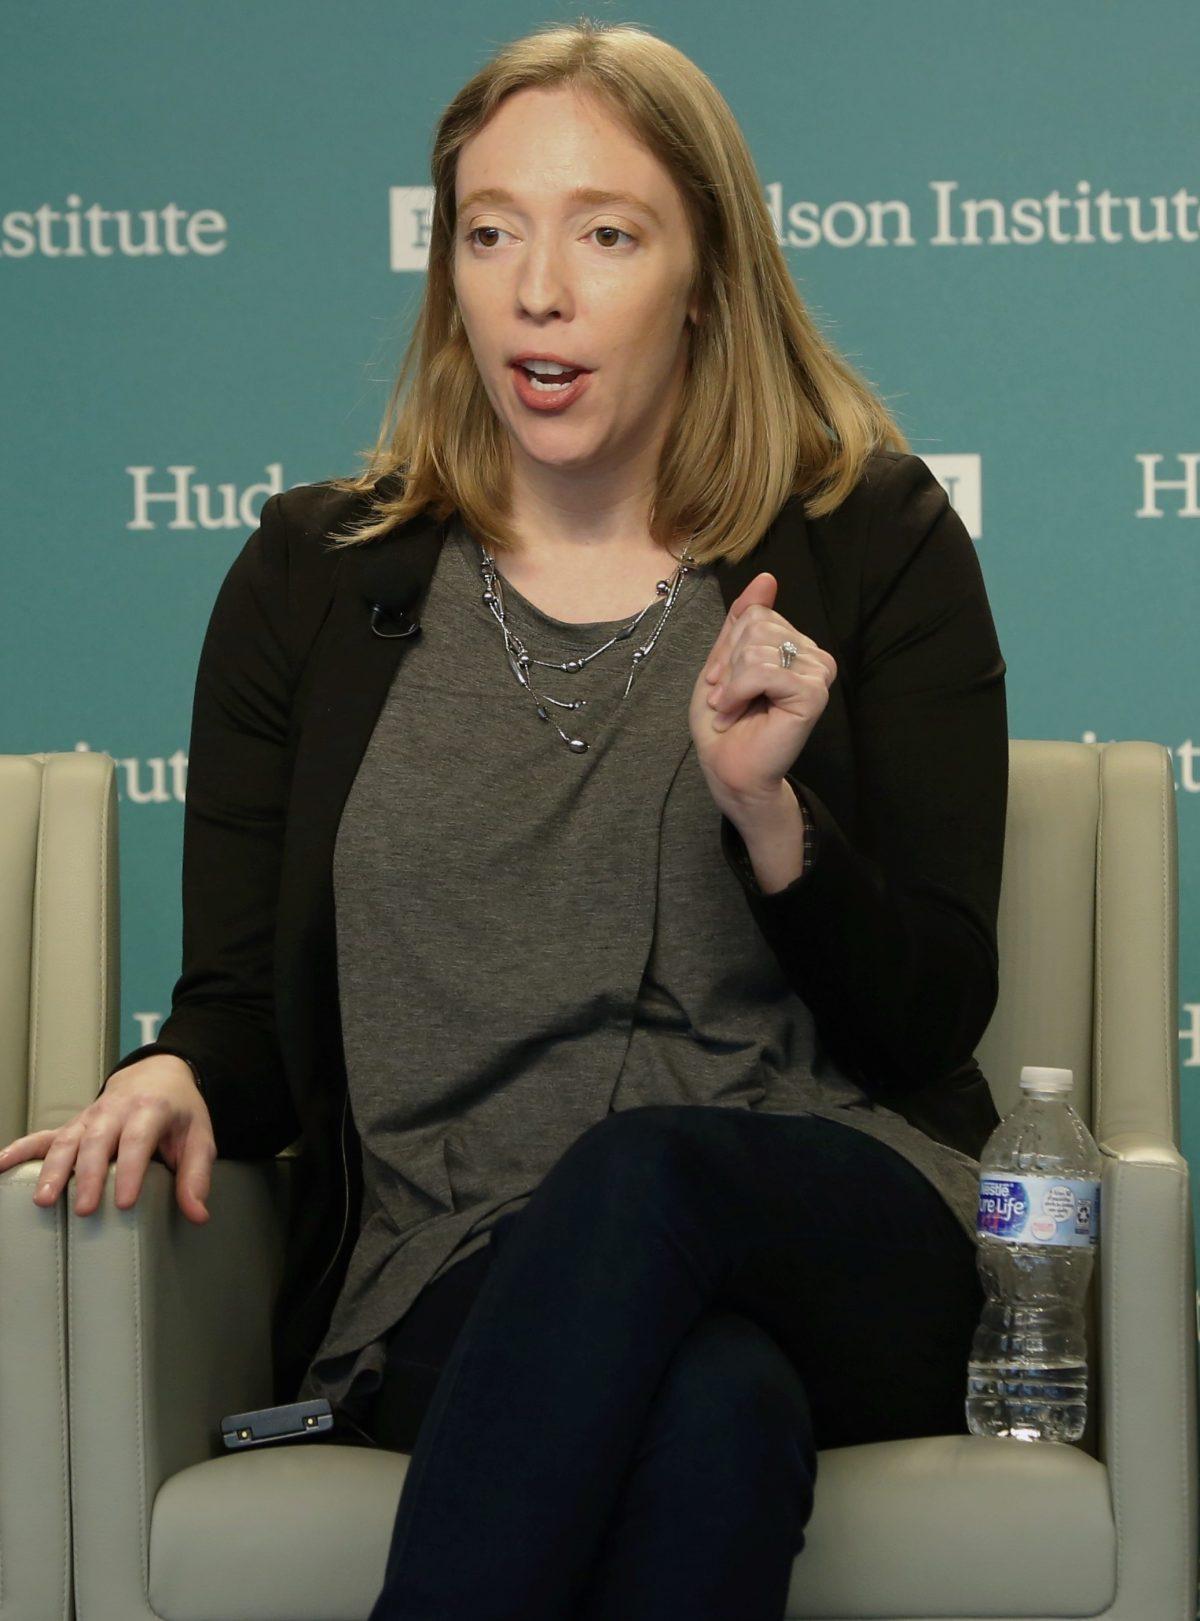 Bethany Allen-Ebrahimian, a former national security reporter at The Daily Beast,  speaking at the "Mark Palmer Forum: China's Global Challenge to Democratic Freedom" at the Hudson Institute in Washington on Oct. 24, 2018. (York Du/NTD)